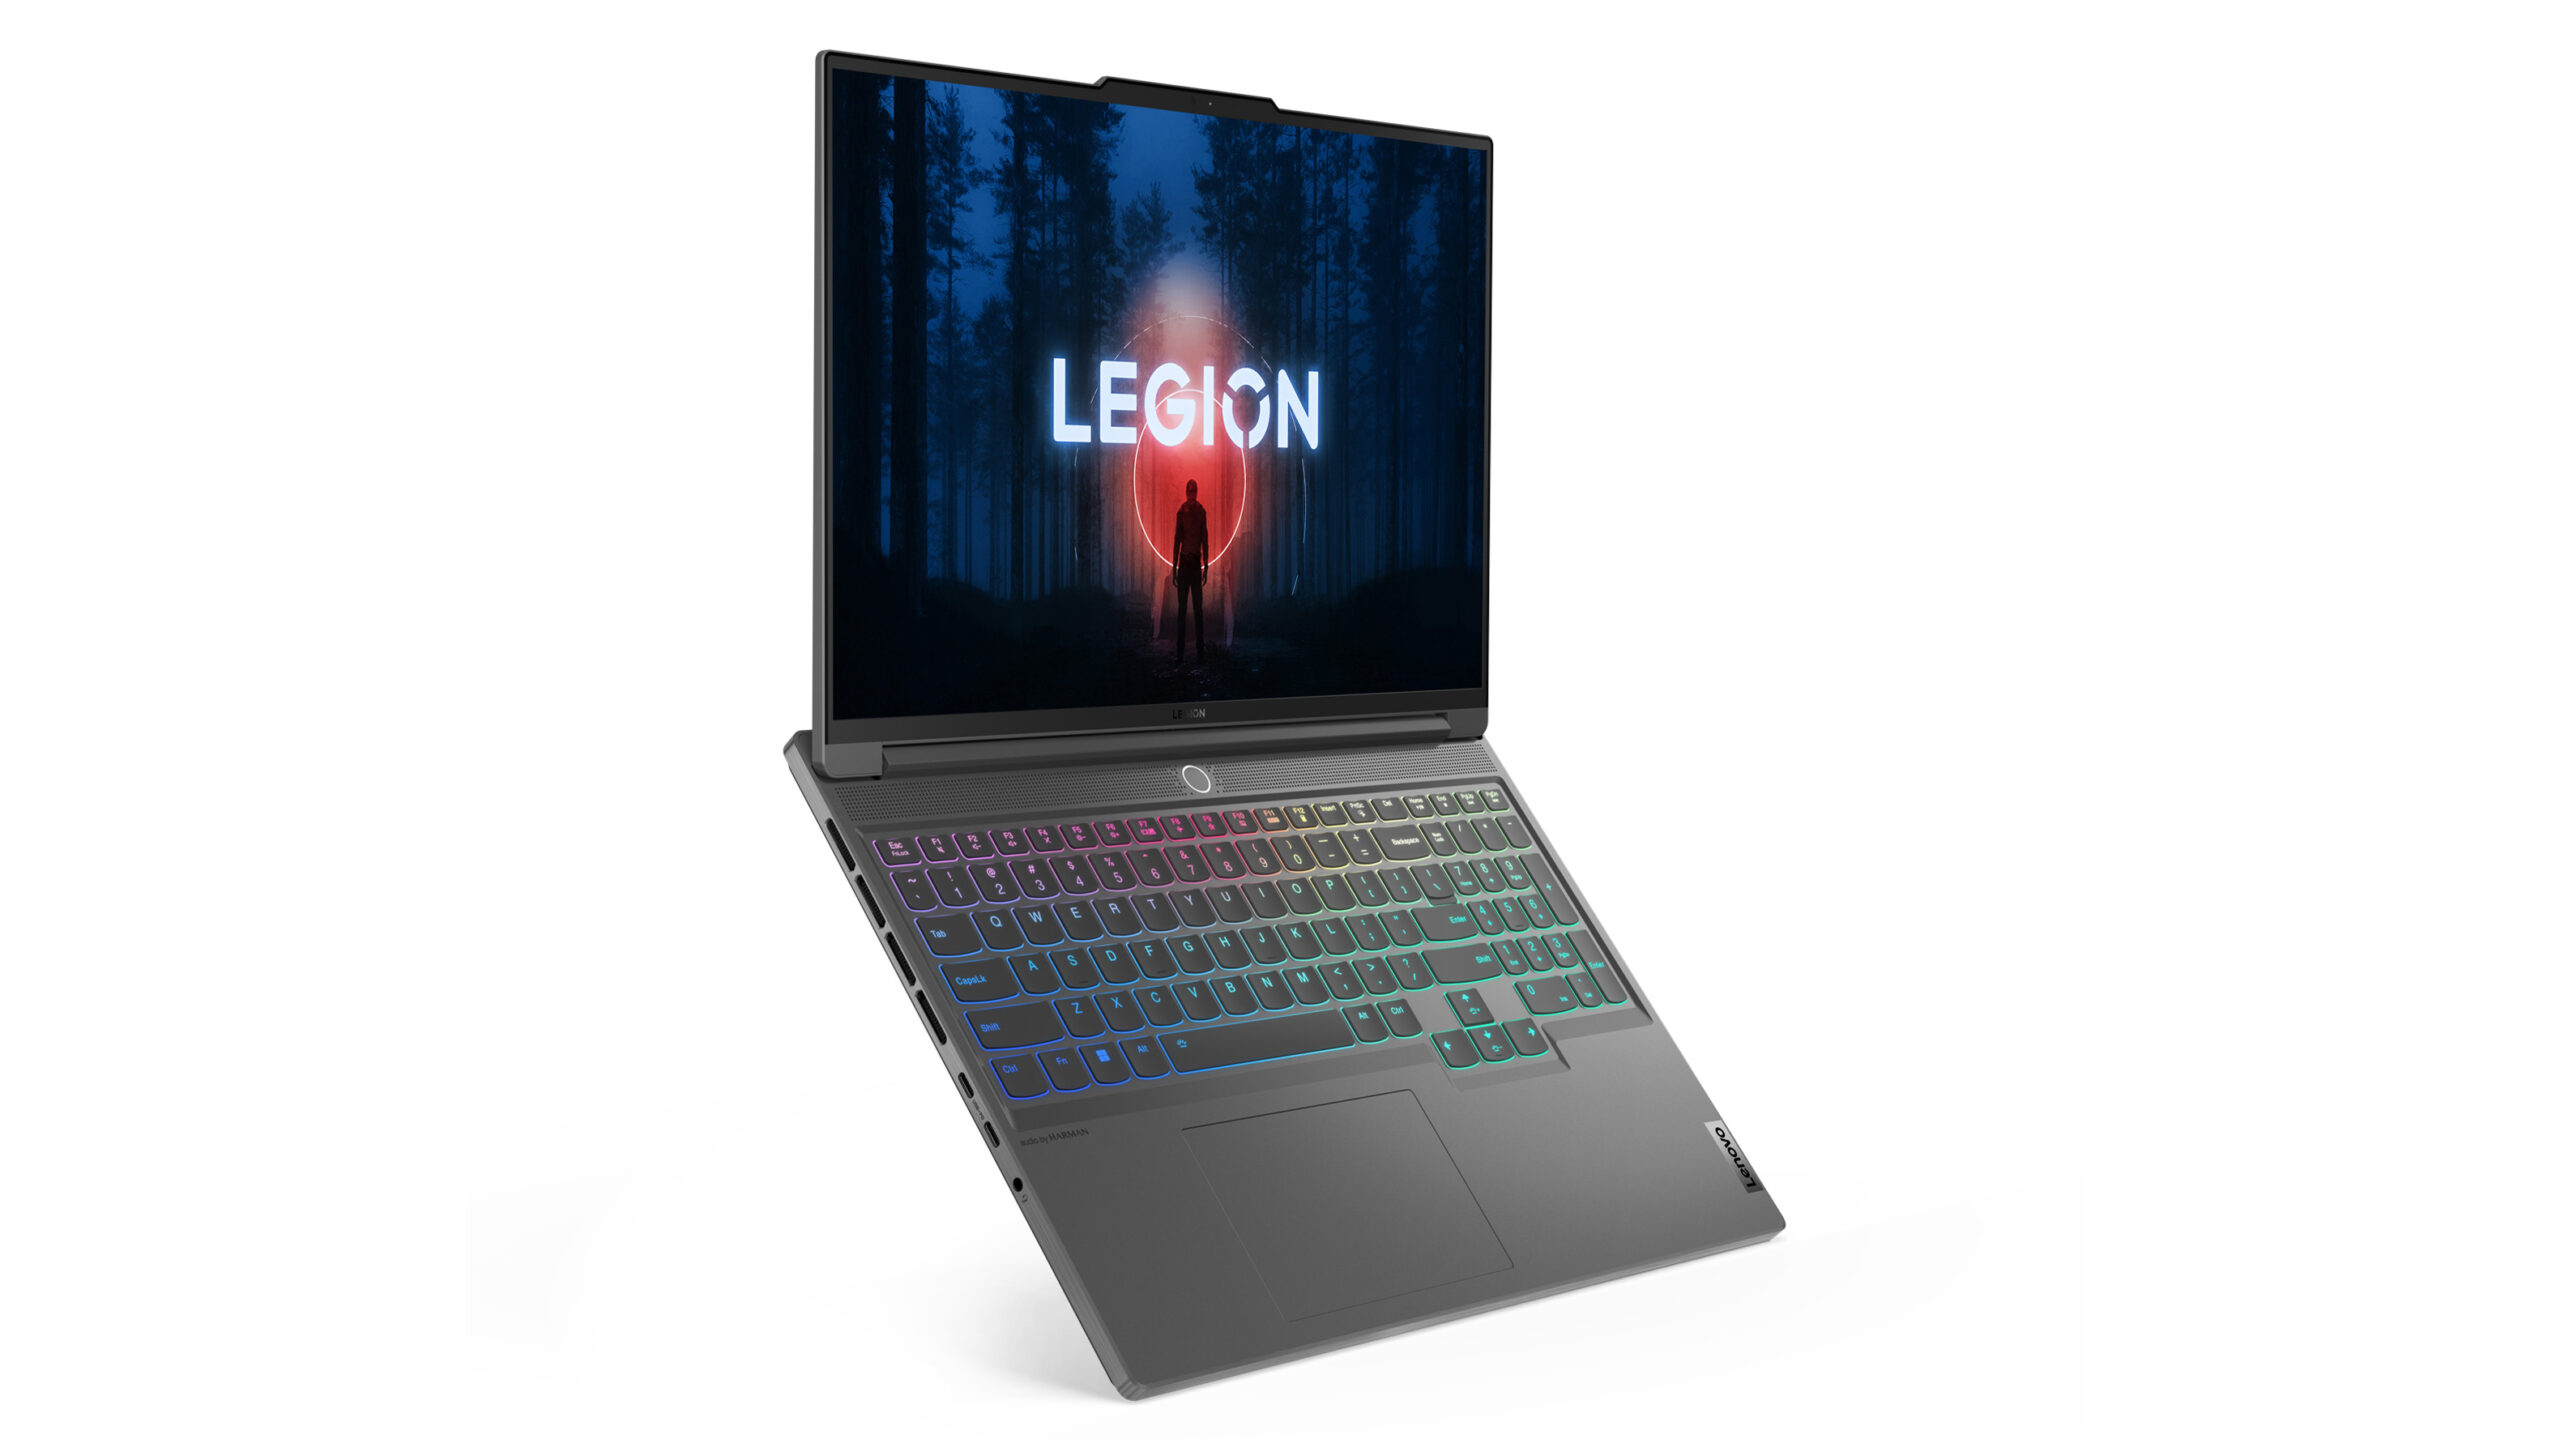 Lenovo's new Legion gaming laptops appear at CES, ready for VR and